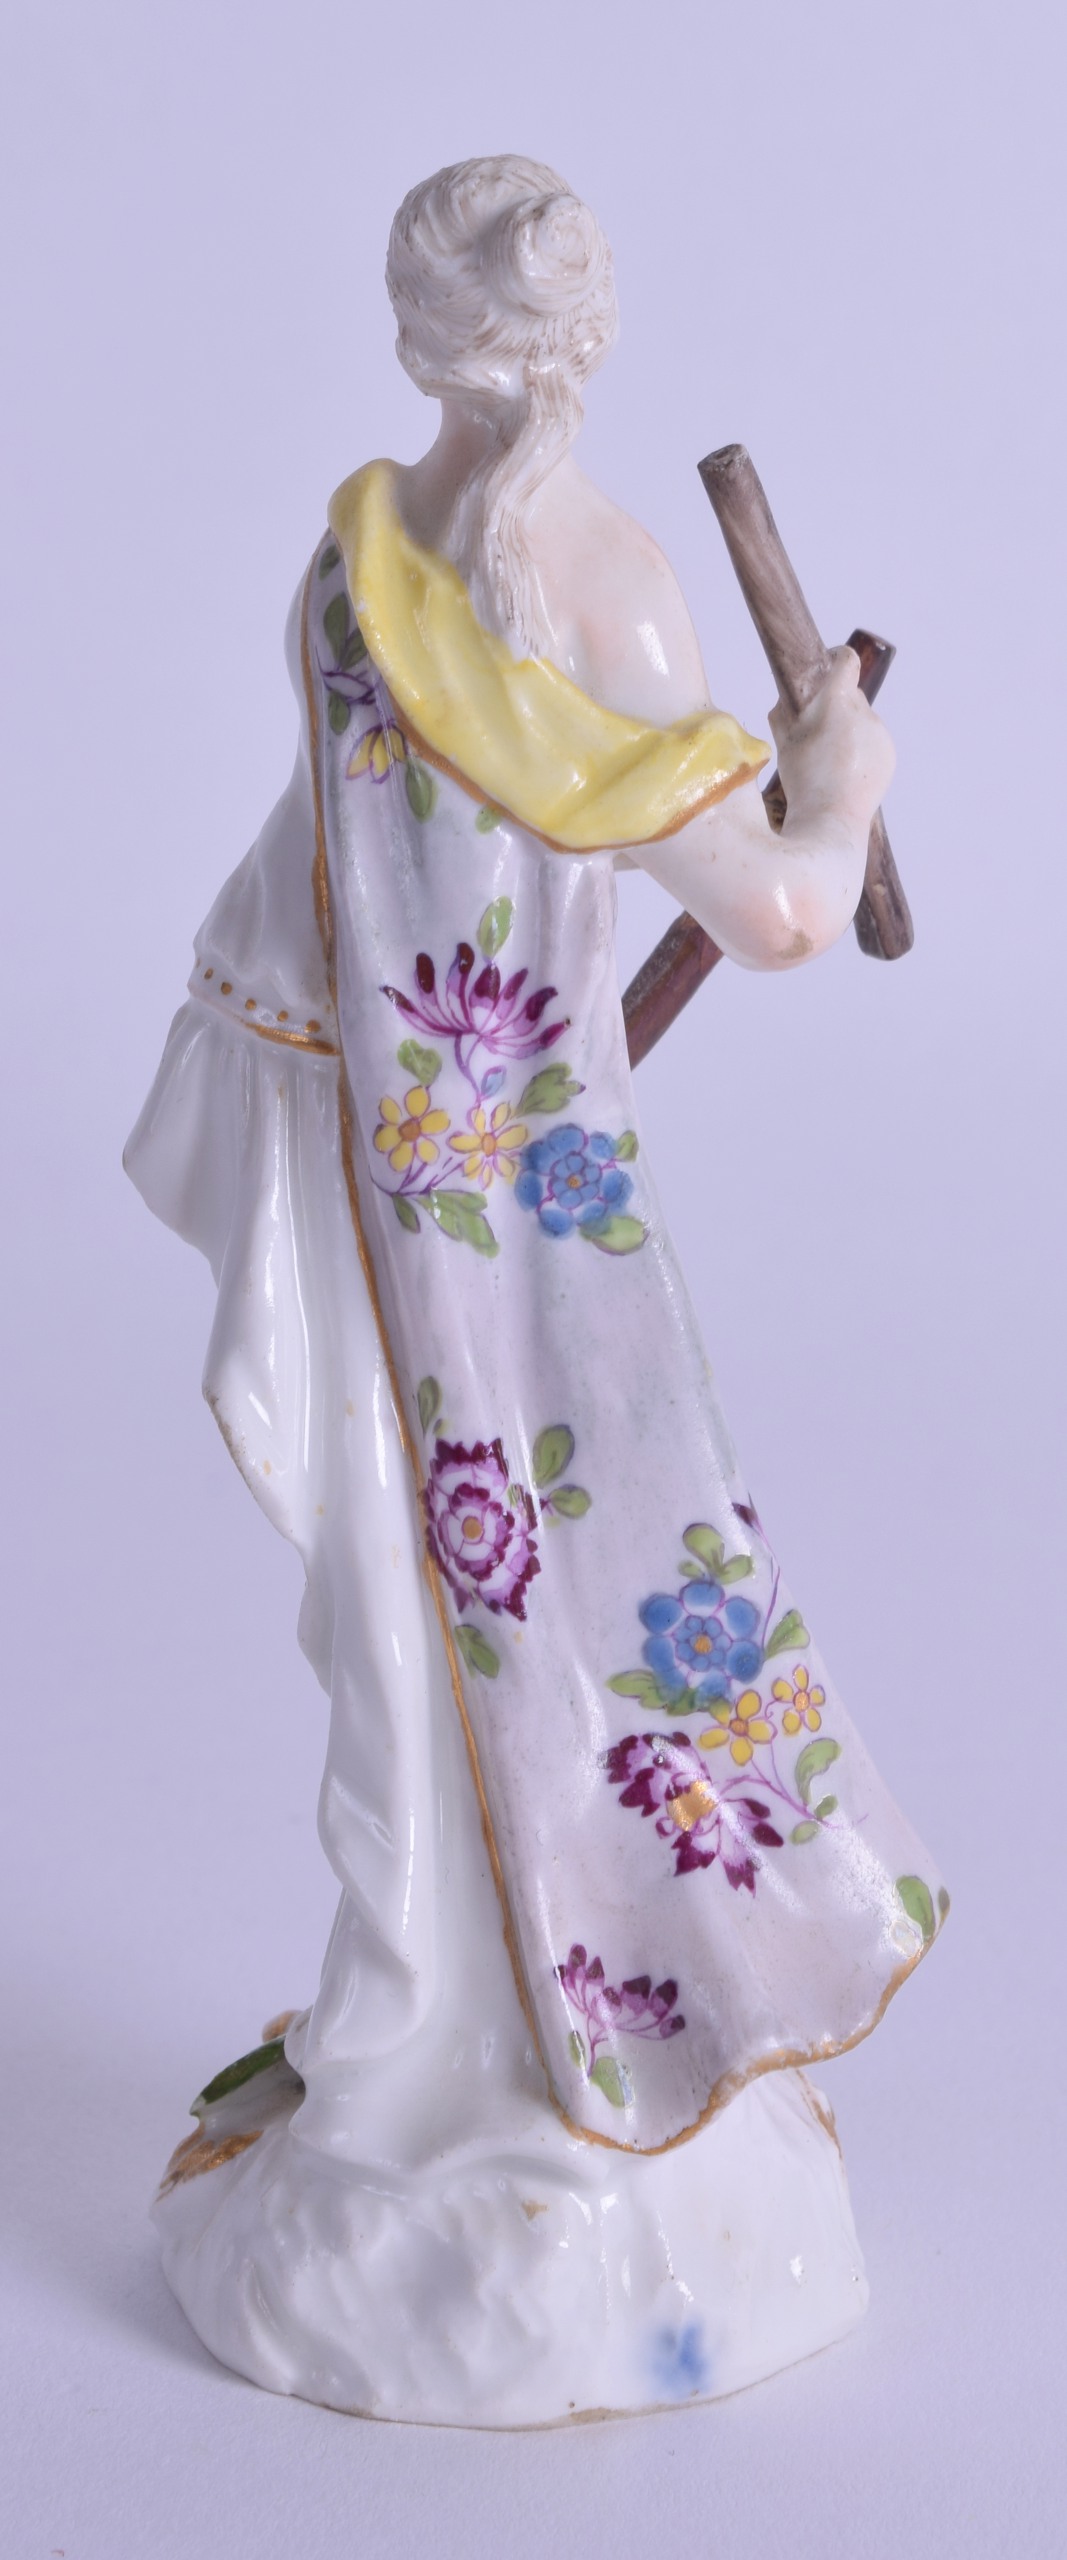 Mid 18th c. Meissen figure of a muse playing music with two wooden sticks - Image 2 of 3